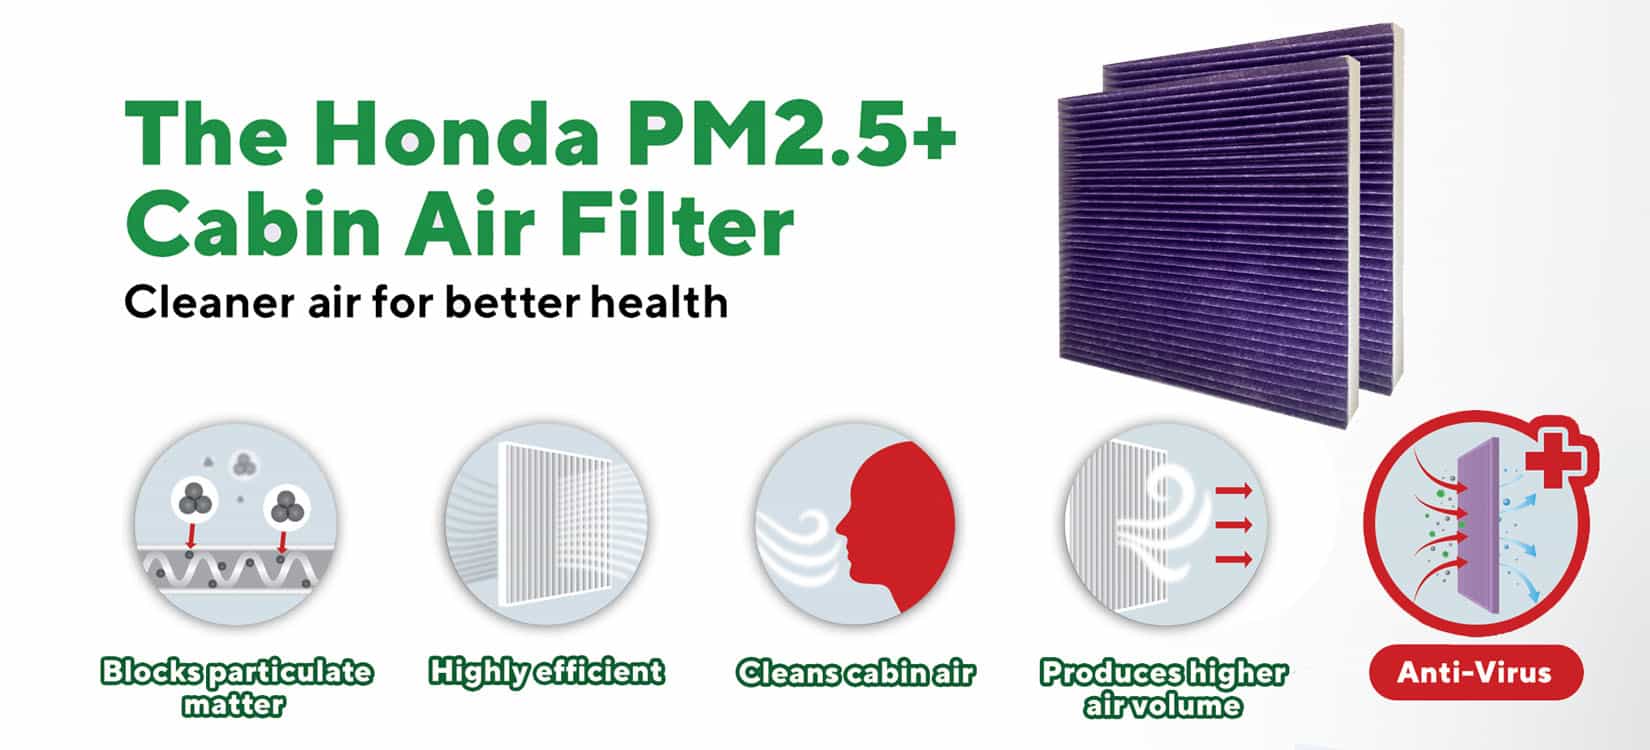 Honda introduces new PM2.5+ Cabin Air Filter